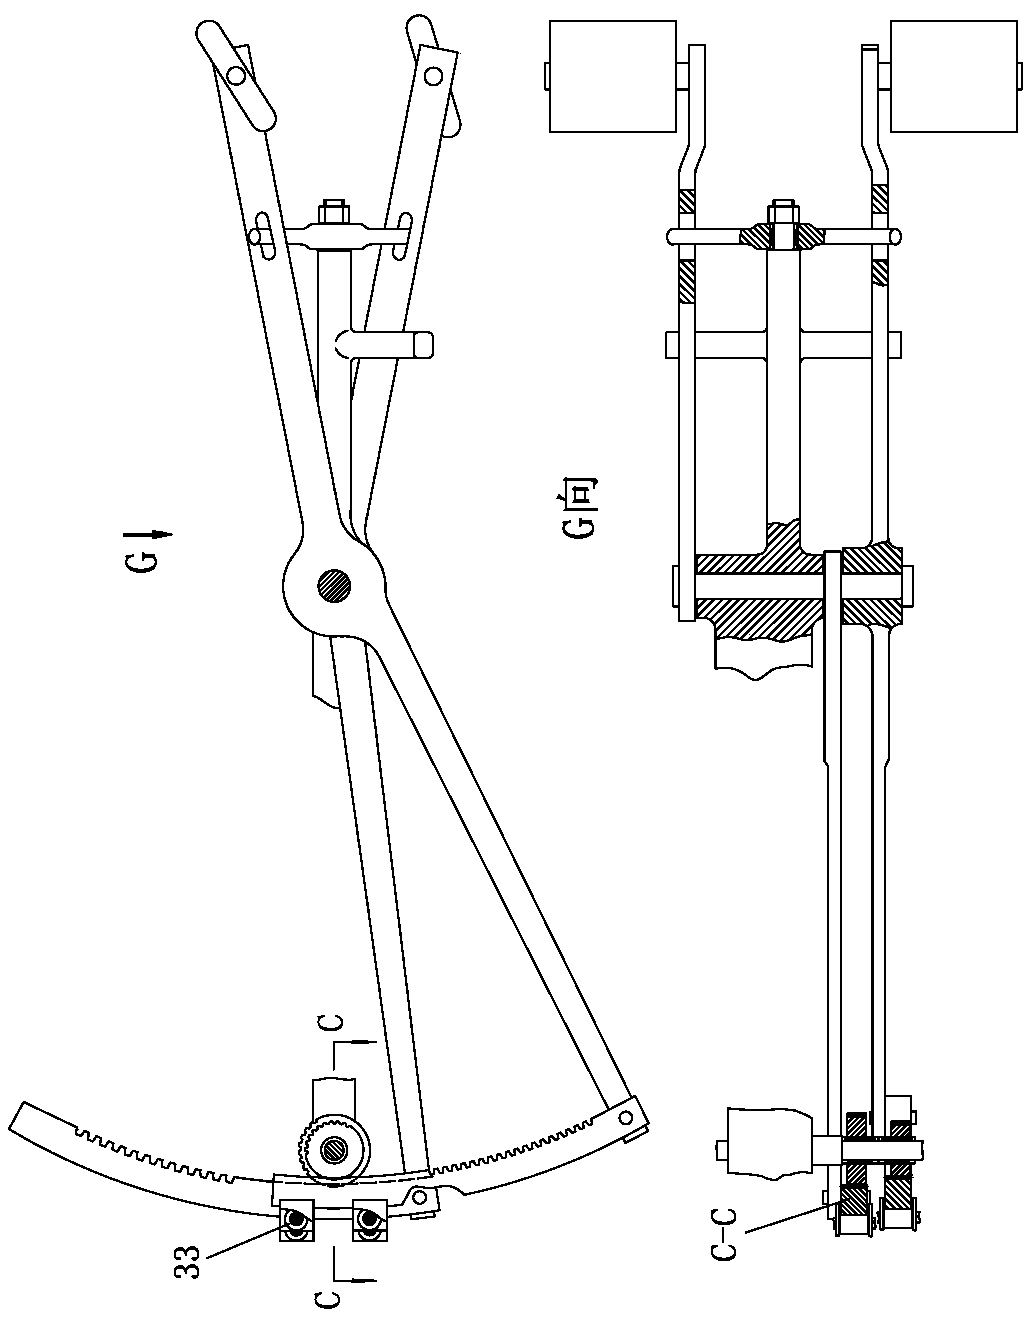 Linkage mechanism and bicycle